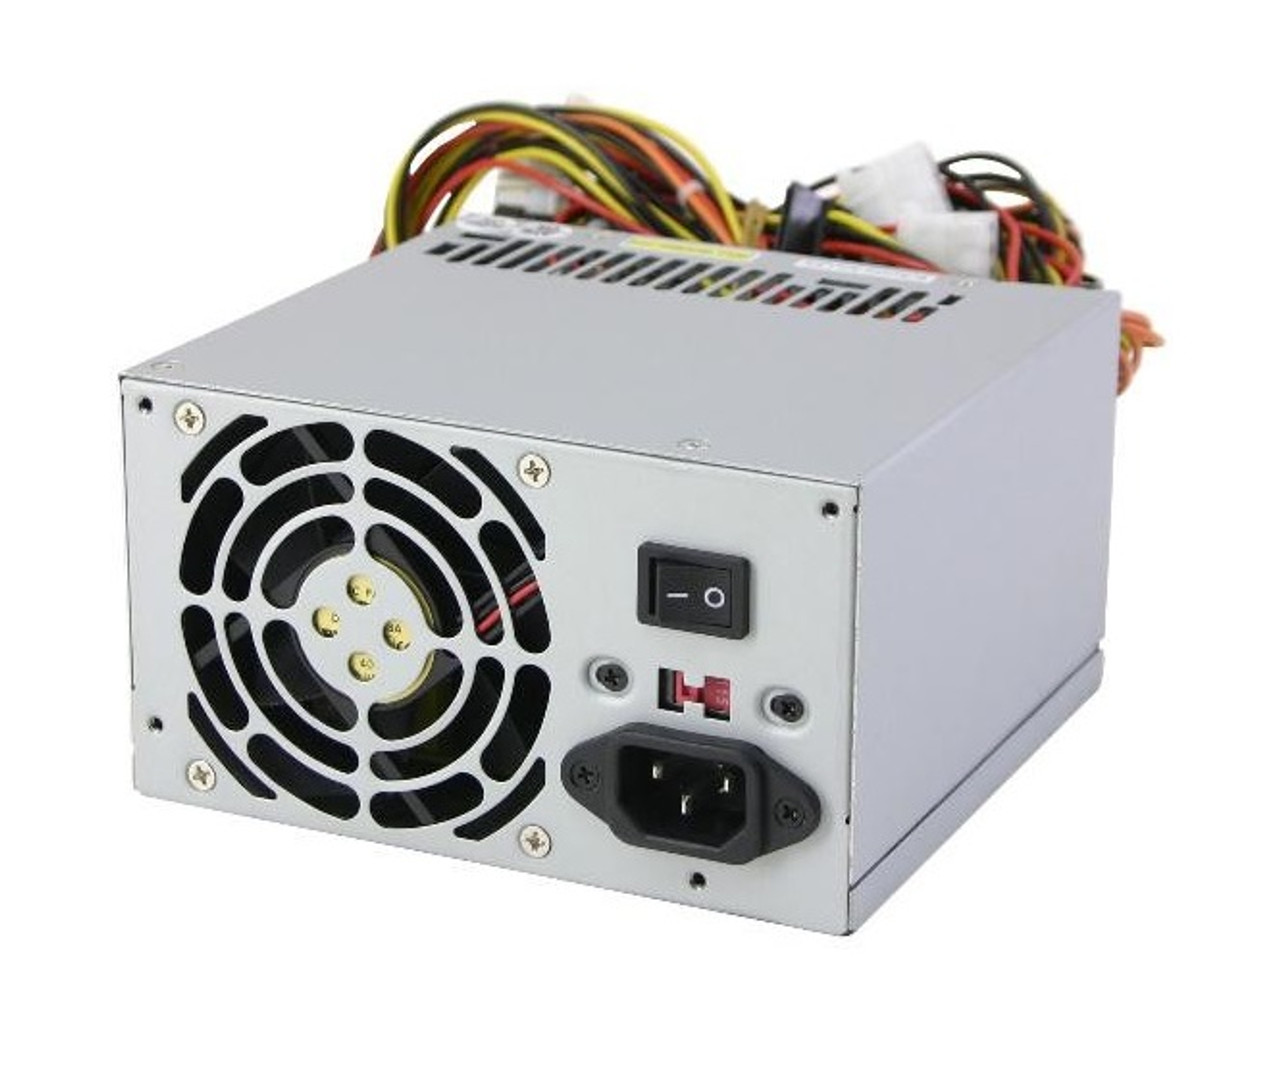 0A91446 - IBM Lenovo 800-Watts Hot-Pluggable Power Supply for ThinkServer RD530 / RD430